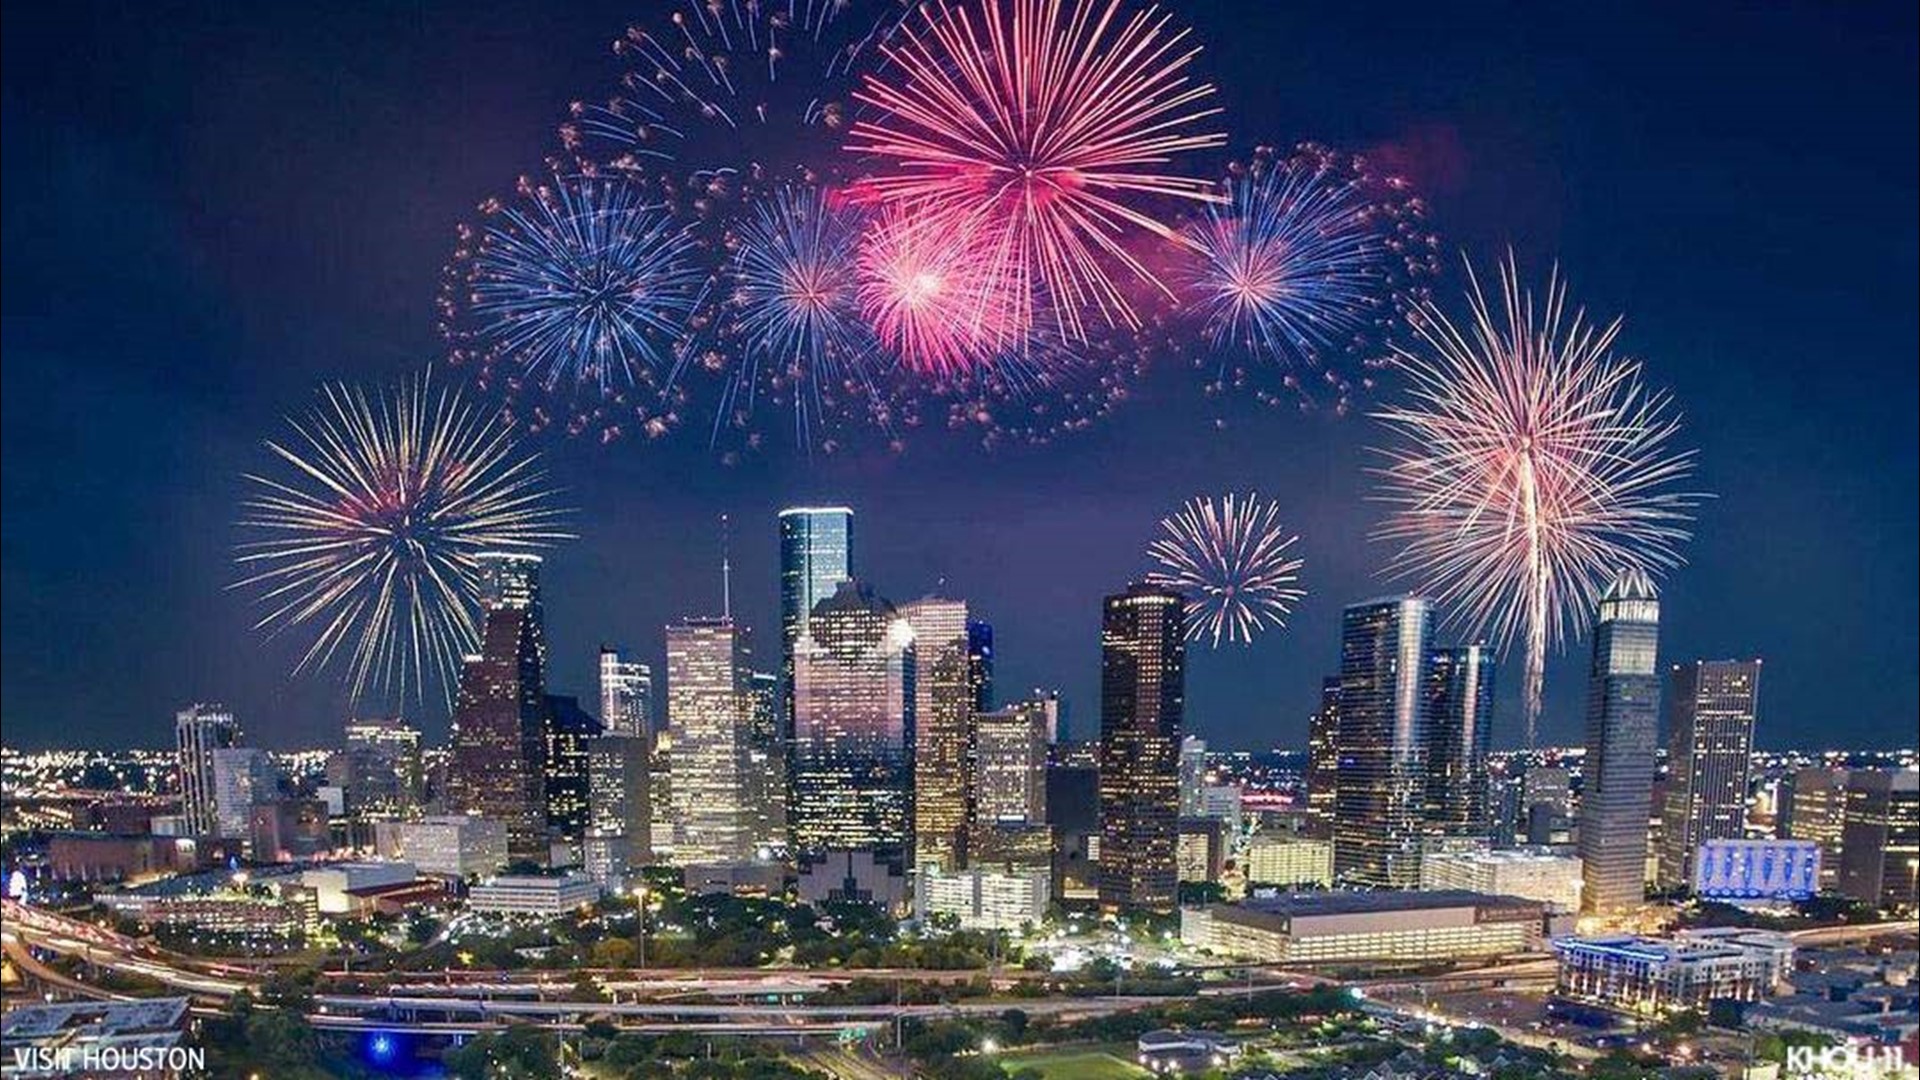 The city of Houston expected around 50,000 people to attend its celebration.